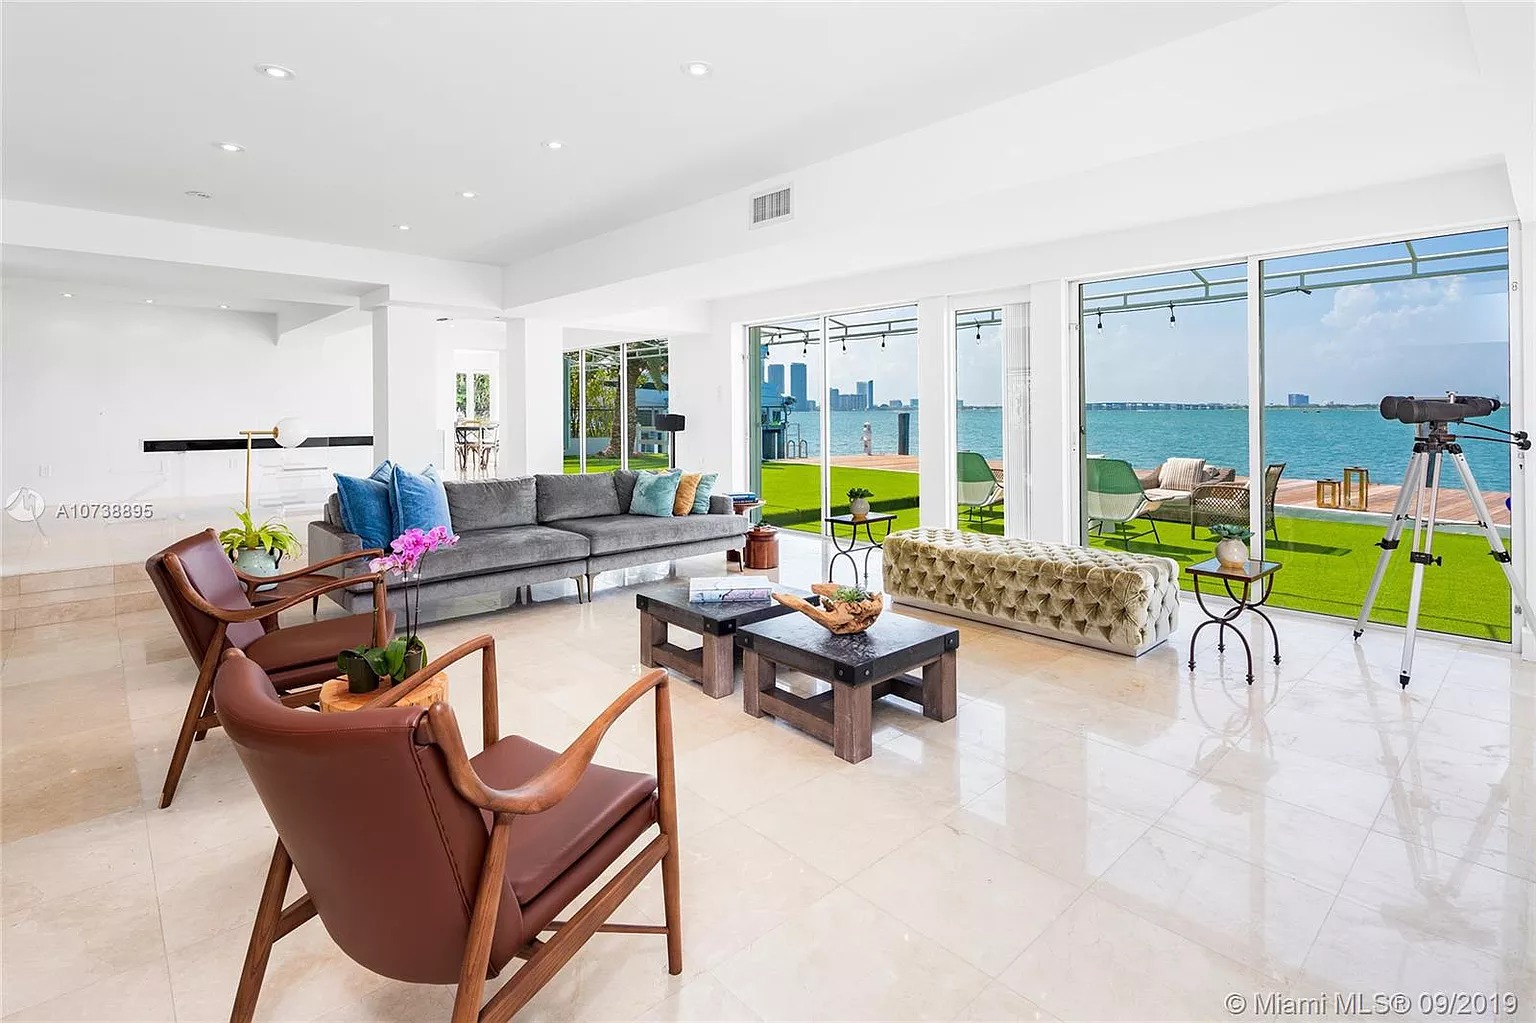 1413 N Venetian Way, Miami Beach, FL 33139 - $6,790,000 home for sale, house images, photos and pics gallery